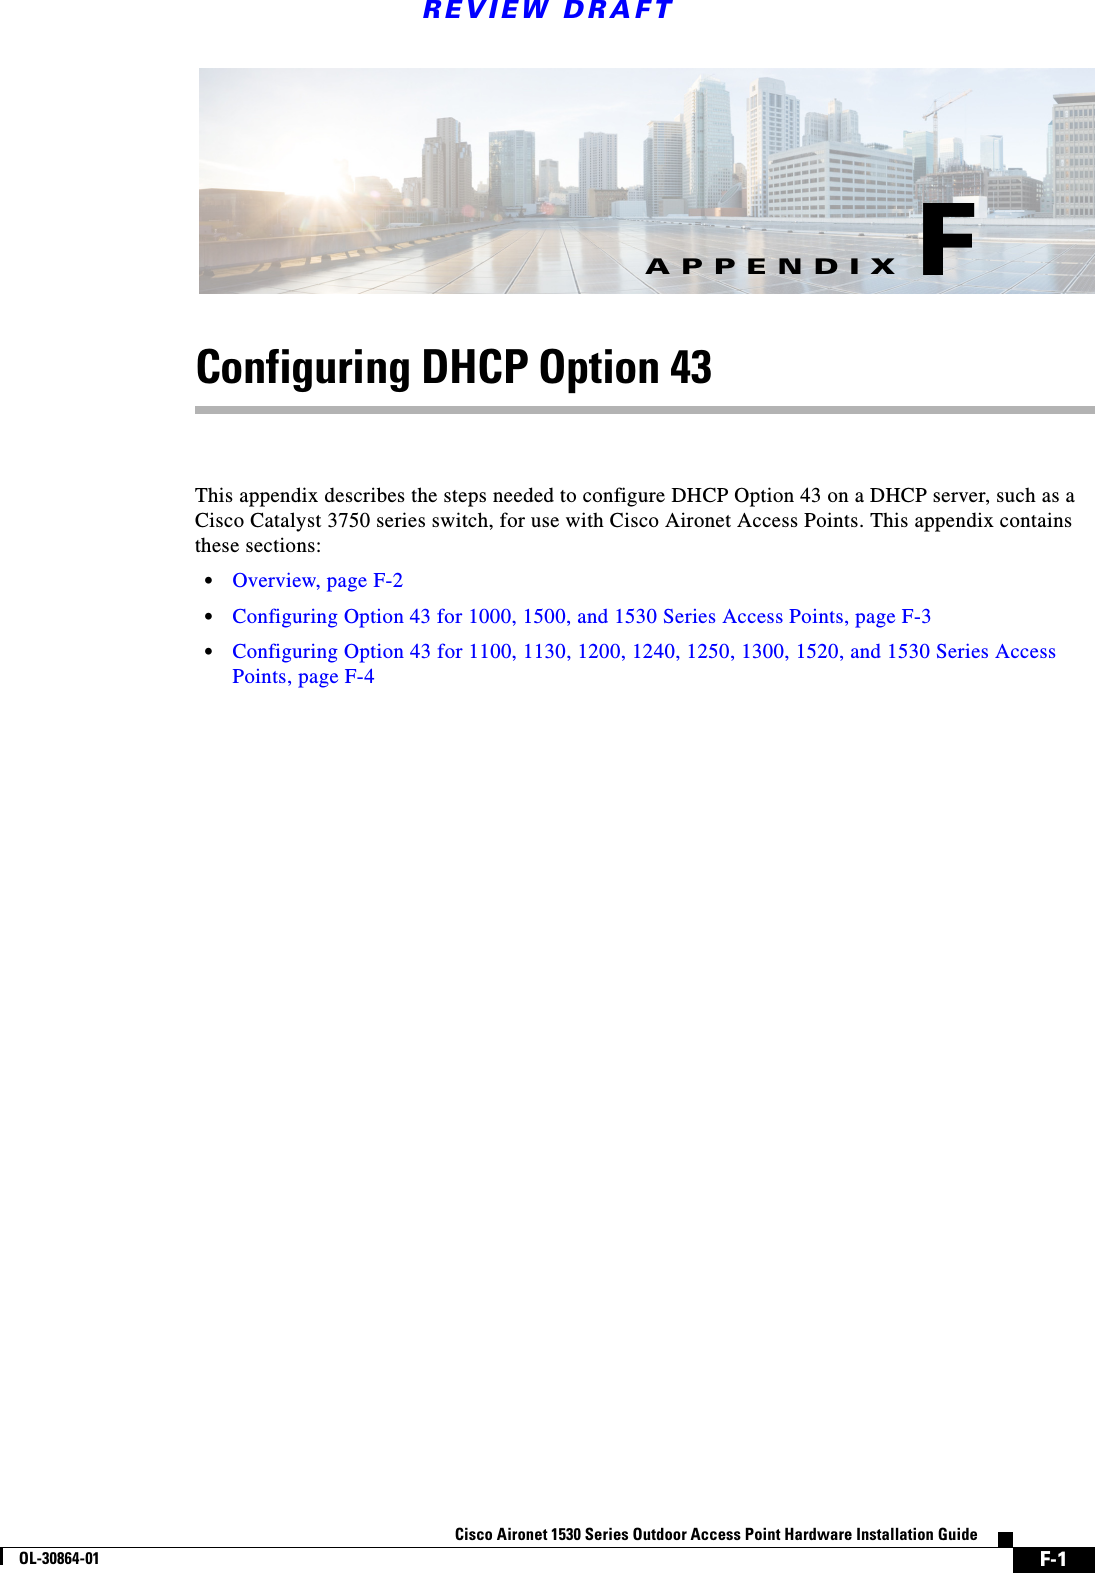 F-1Cisco Aironet 1530 Series Outdoor Access Point Hardware Installation GuideOL-30864-01APPENDIXREVIEW DRAFTFConfiguring DHCP Option 43This appendix describes the steps needed to configure DHCP Option 43 on a DHCP server, such as a Cisco Catalyst 3750 series switch, for use with Cisco Aironet Access Points. This appendix contains these sections:•Overview, page F-2•Configuring Option 43 for 1000, 1500, and 1530 Series Access Points, page F-3•Configuring Option 43 for 1100, 1130, 1200, 1240, 1250, 1300, 1520, and 1530 Series Access Points, page F-4